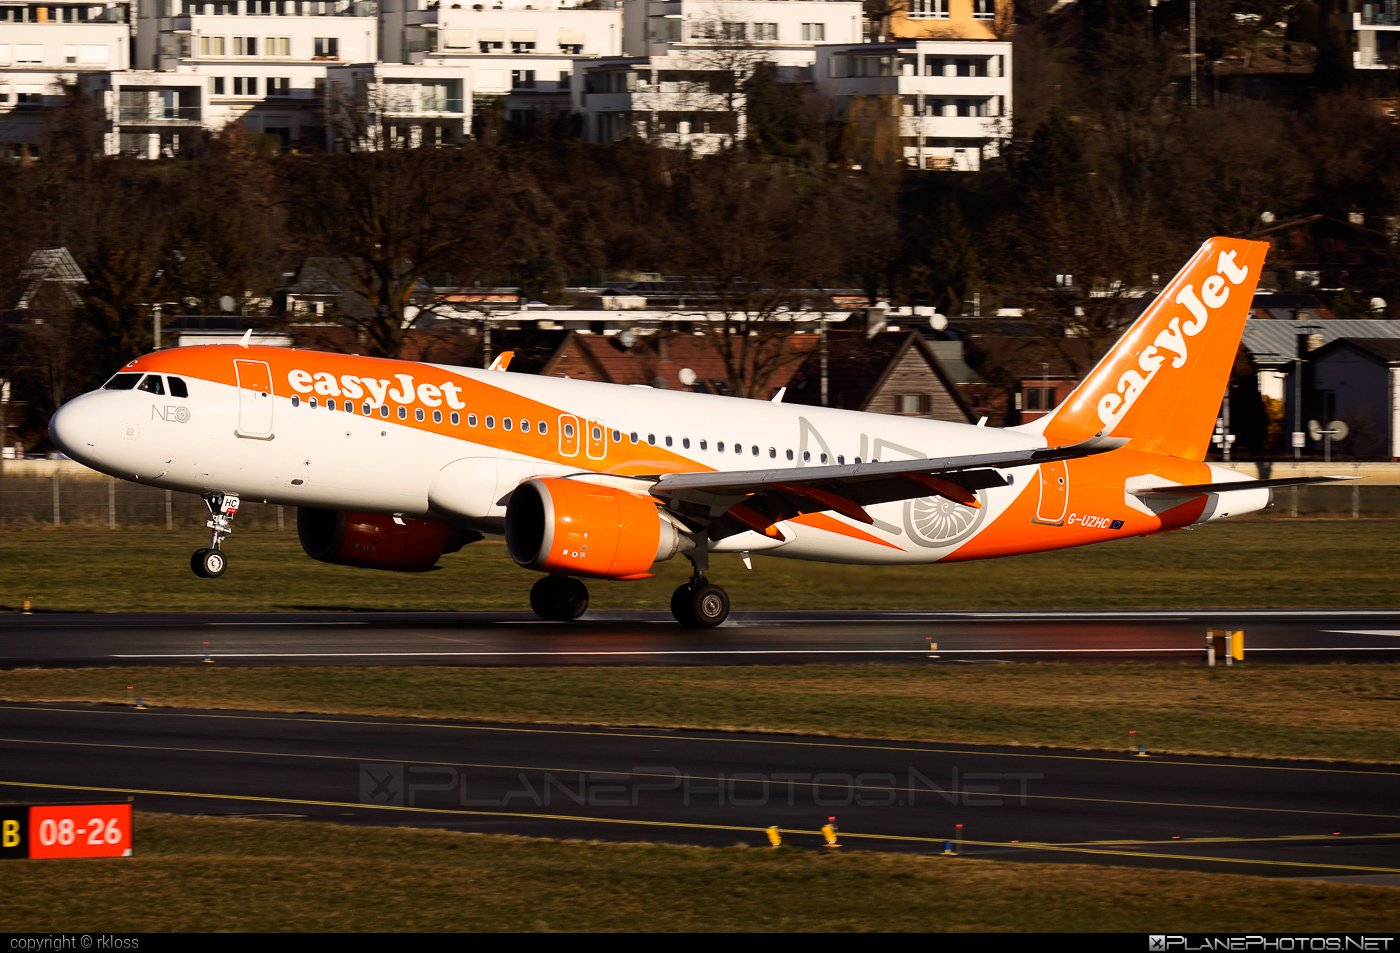 Airbus A320-251N - G-UZHC operated by easyJet #a320 #a320family #a320neo #airbus #airbus320 #easyjet